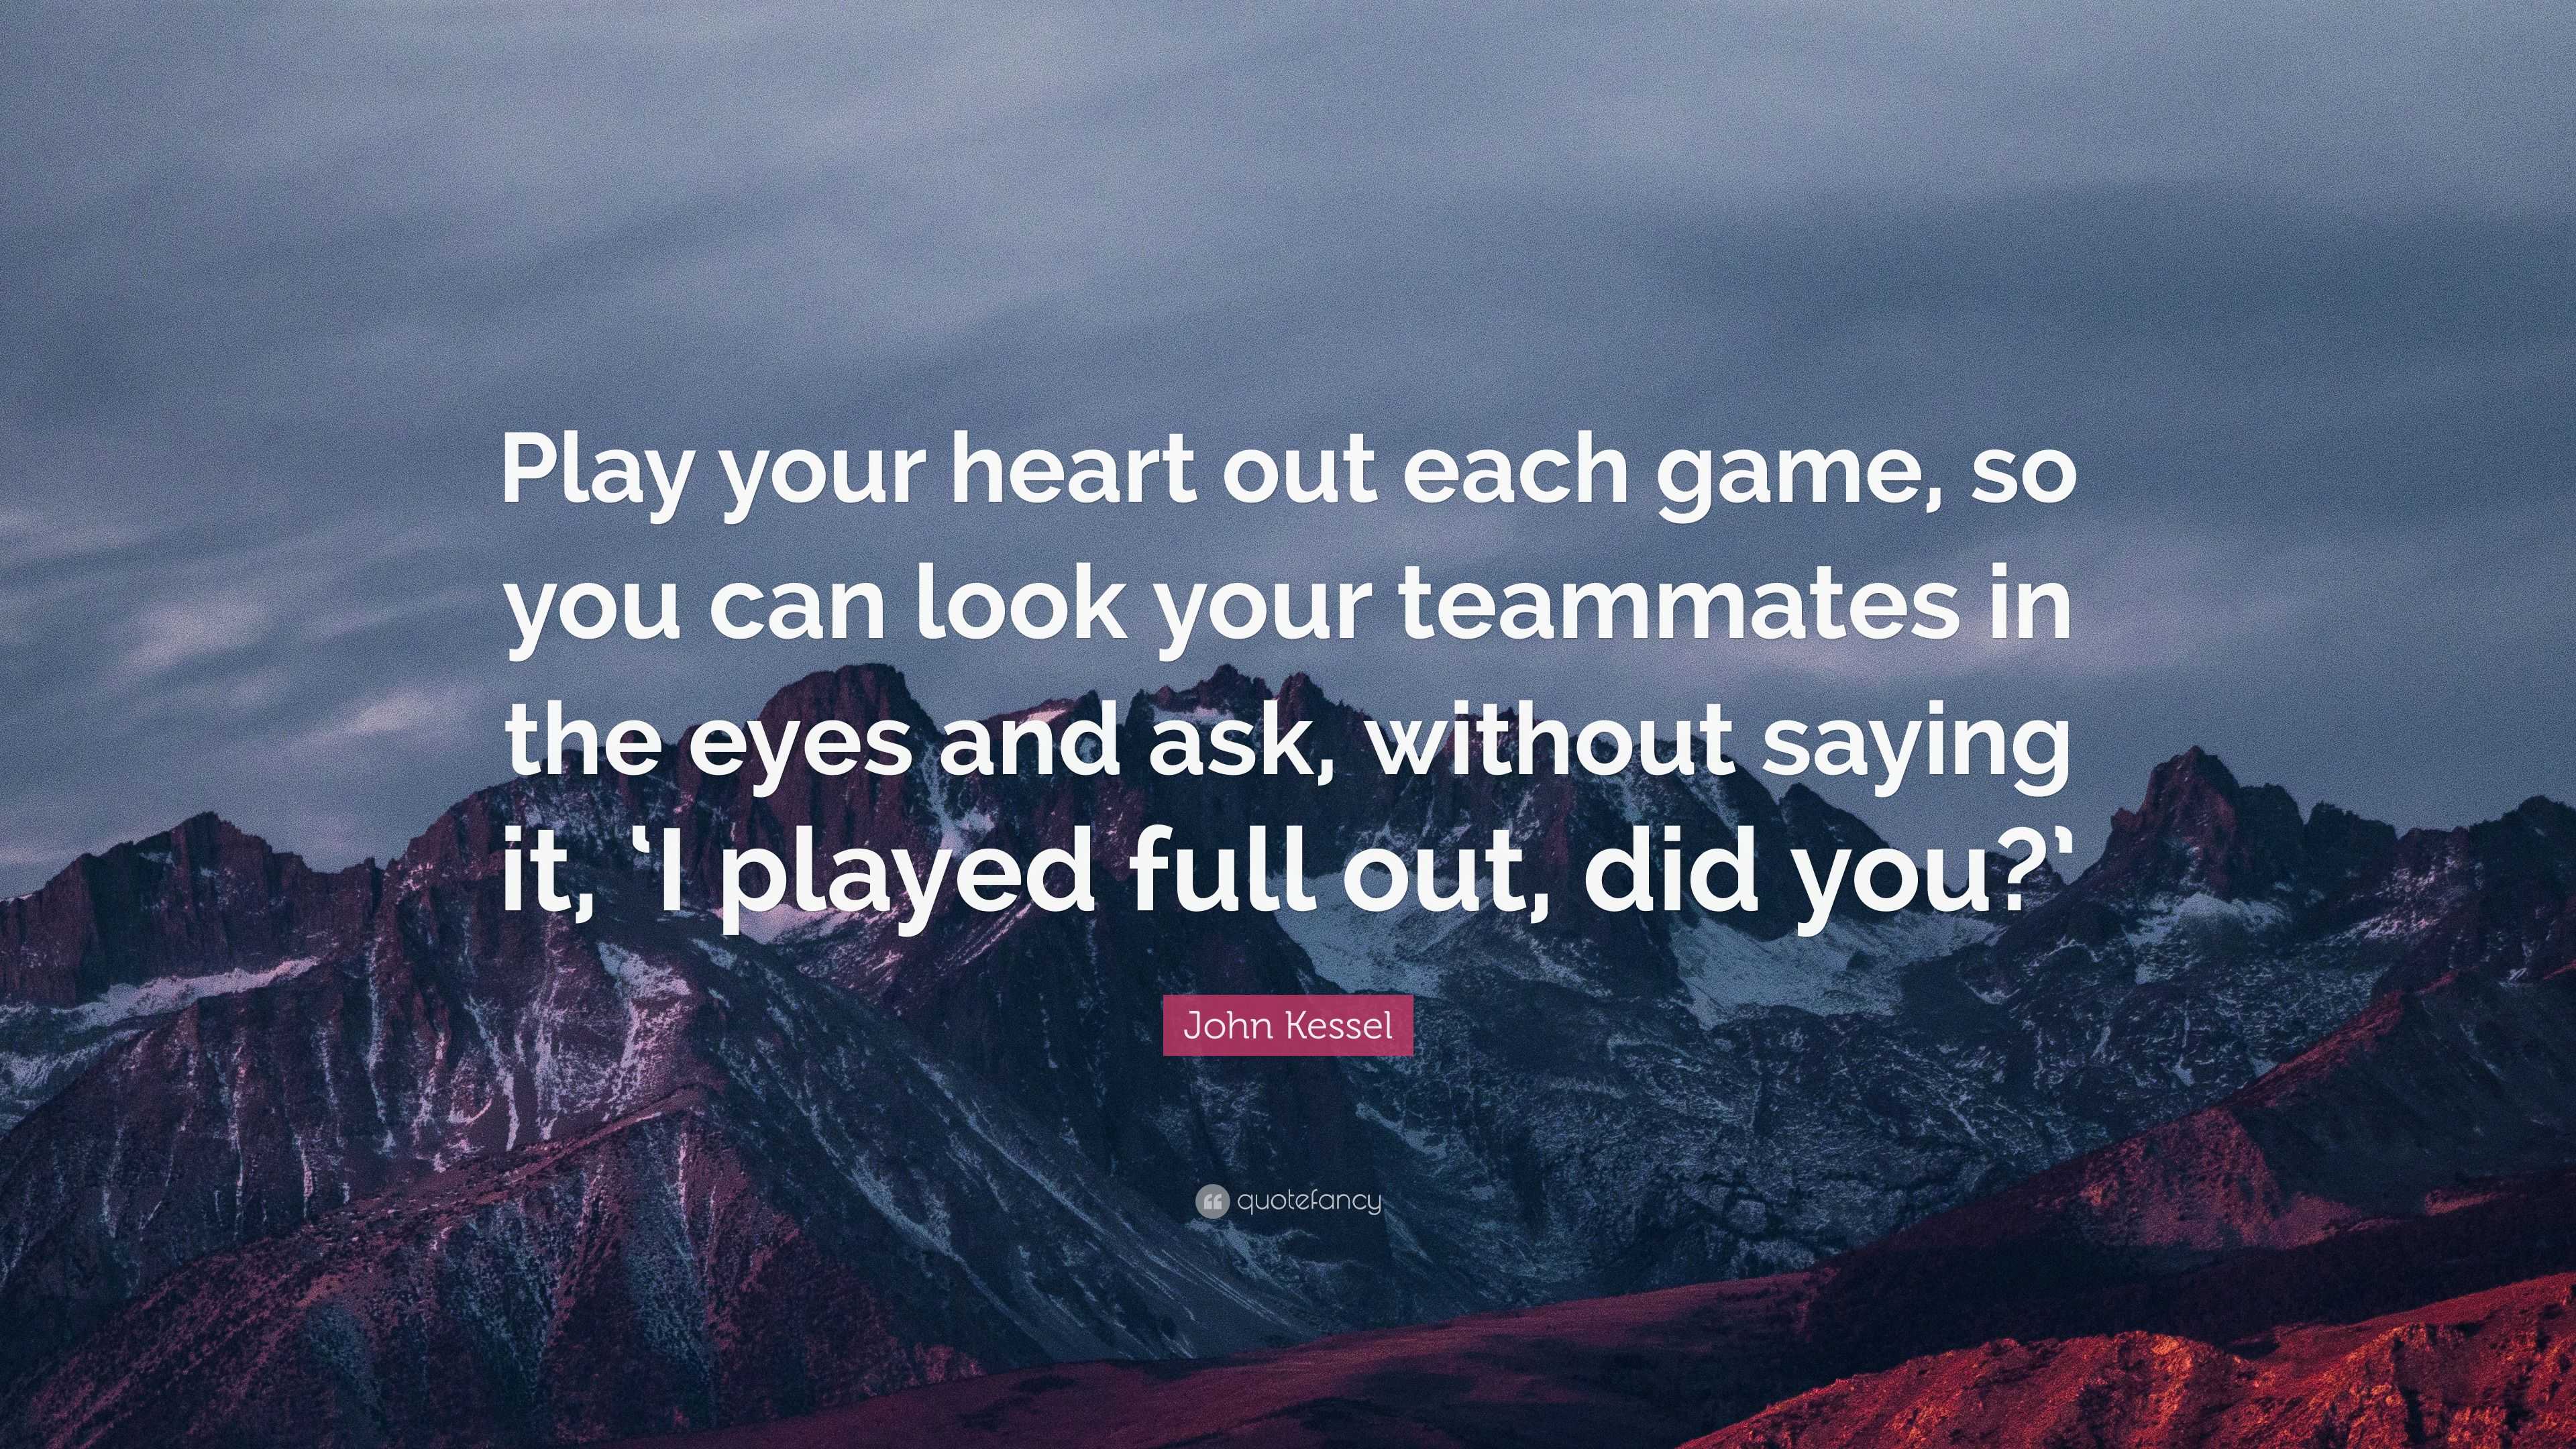 John Kessel Quote: “Play your heart out each game, so you can look your  teammates in the eyes and ask, without saying it, 'I played full out”